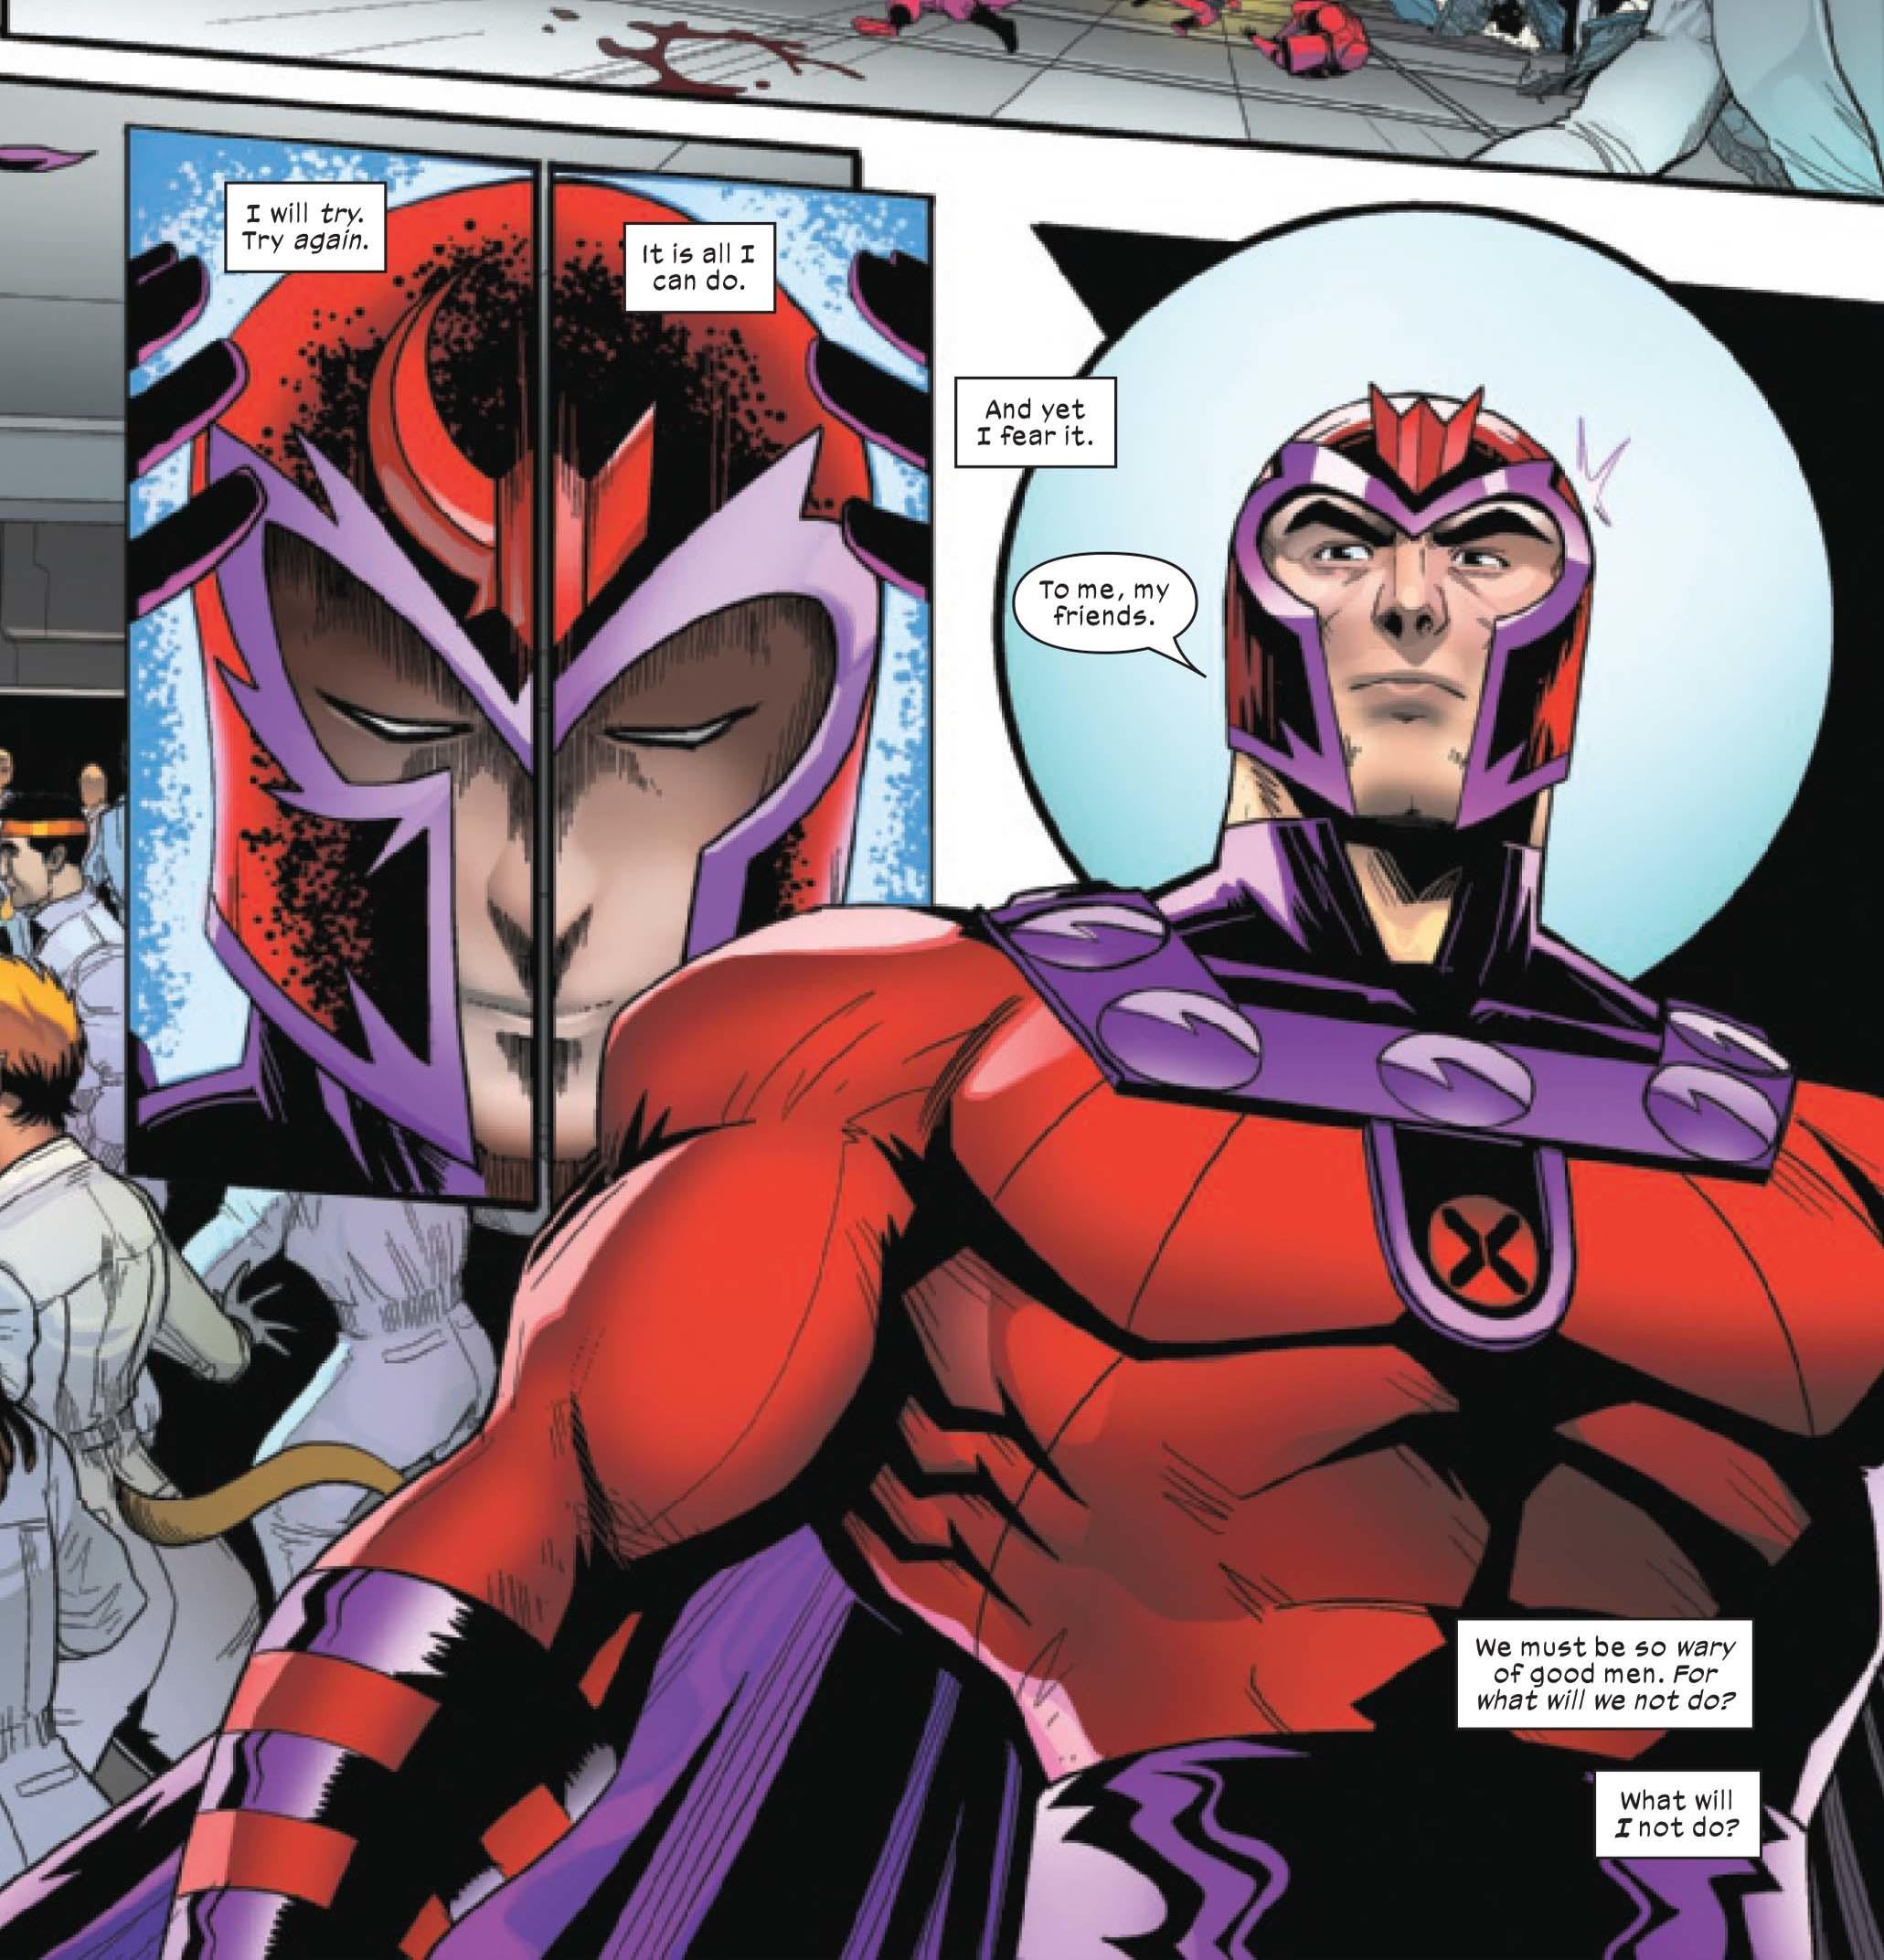 X-Men: Magneto Returns From the Dead With a New Heroic Costume